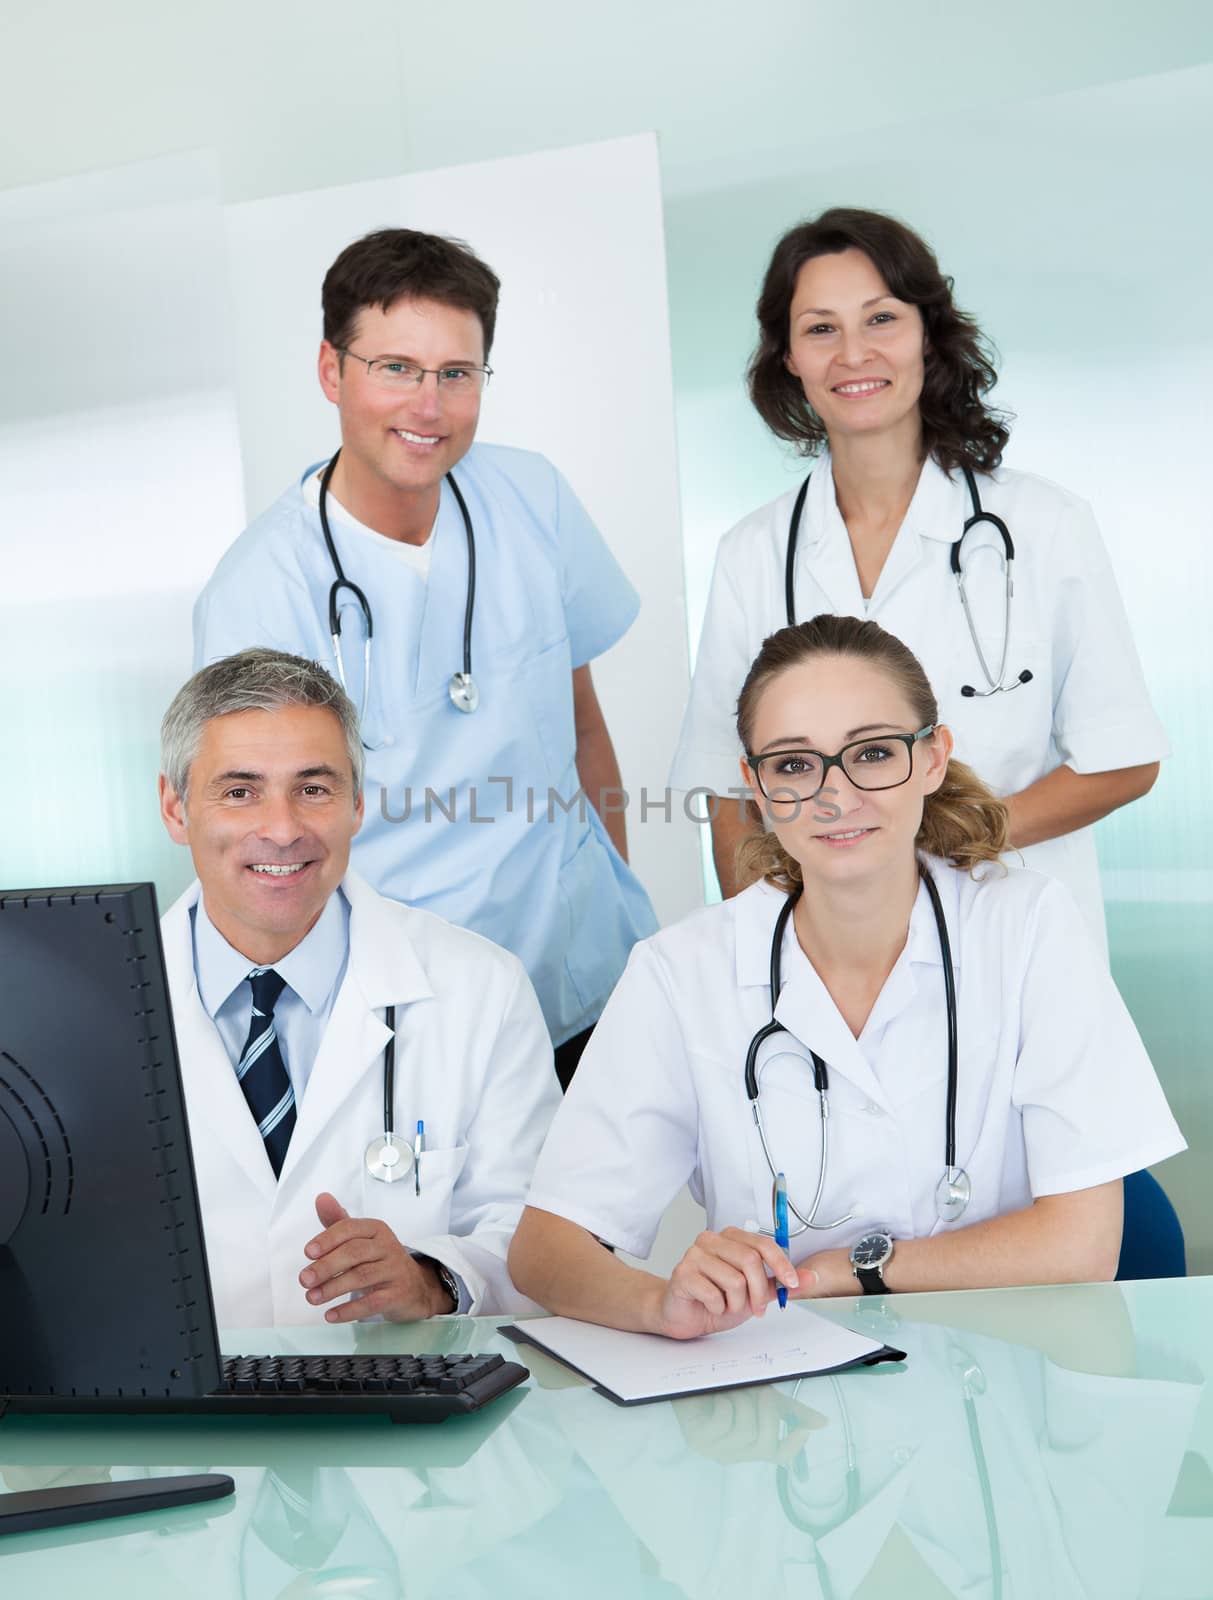 Medical team comprising male and female doctors posing together in an office smiling at the camera